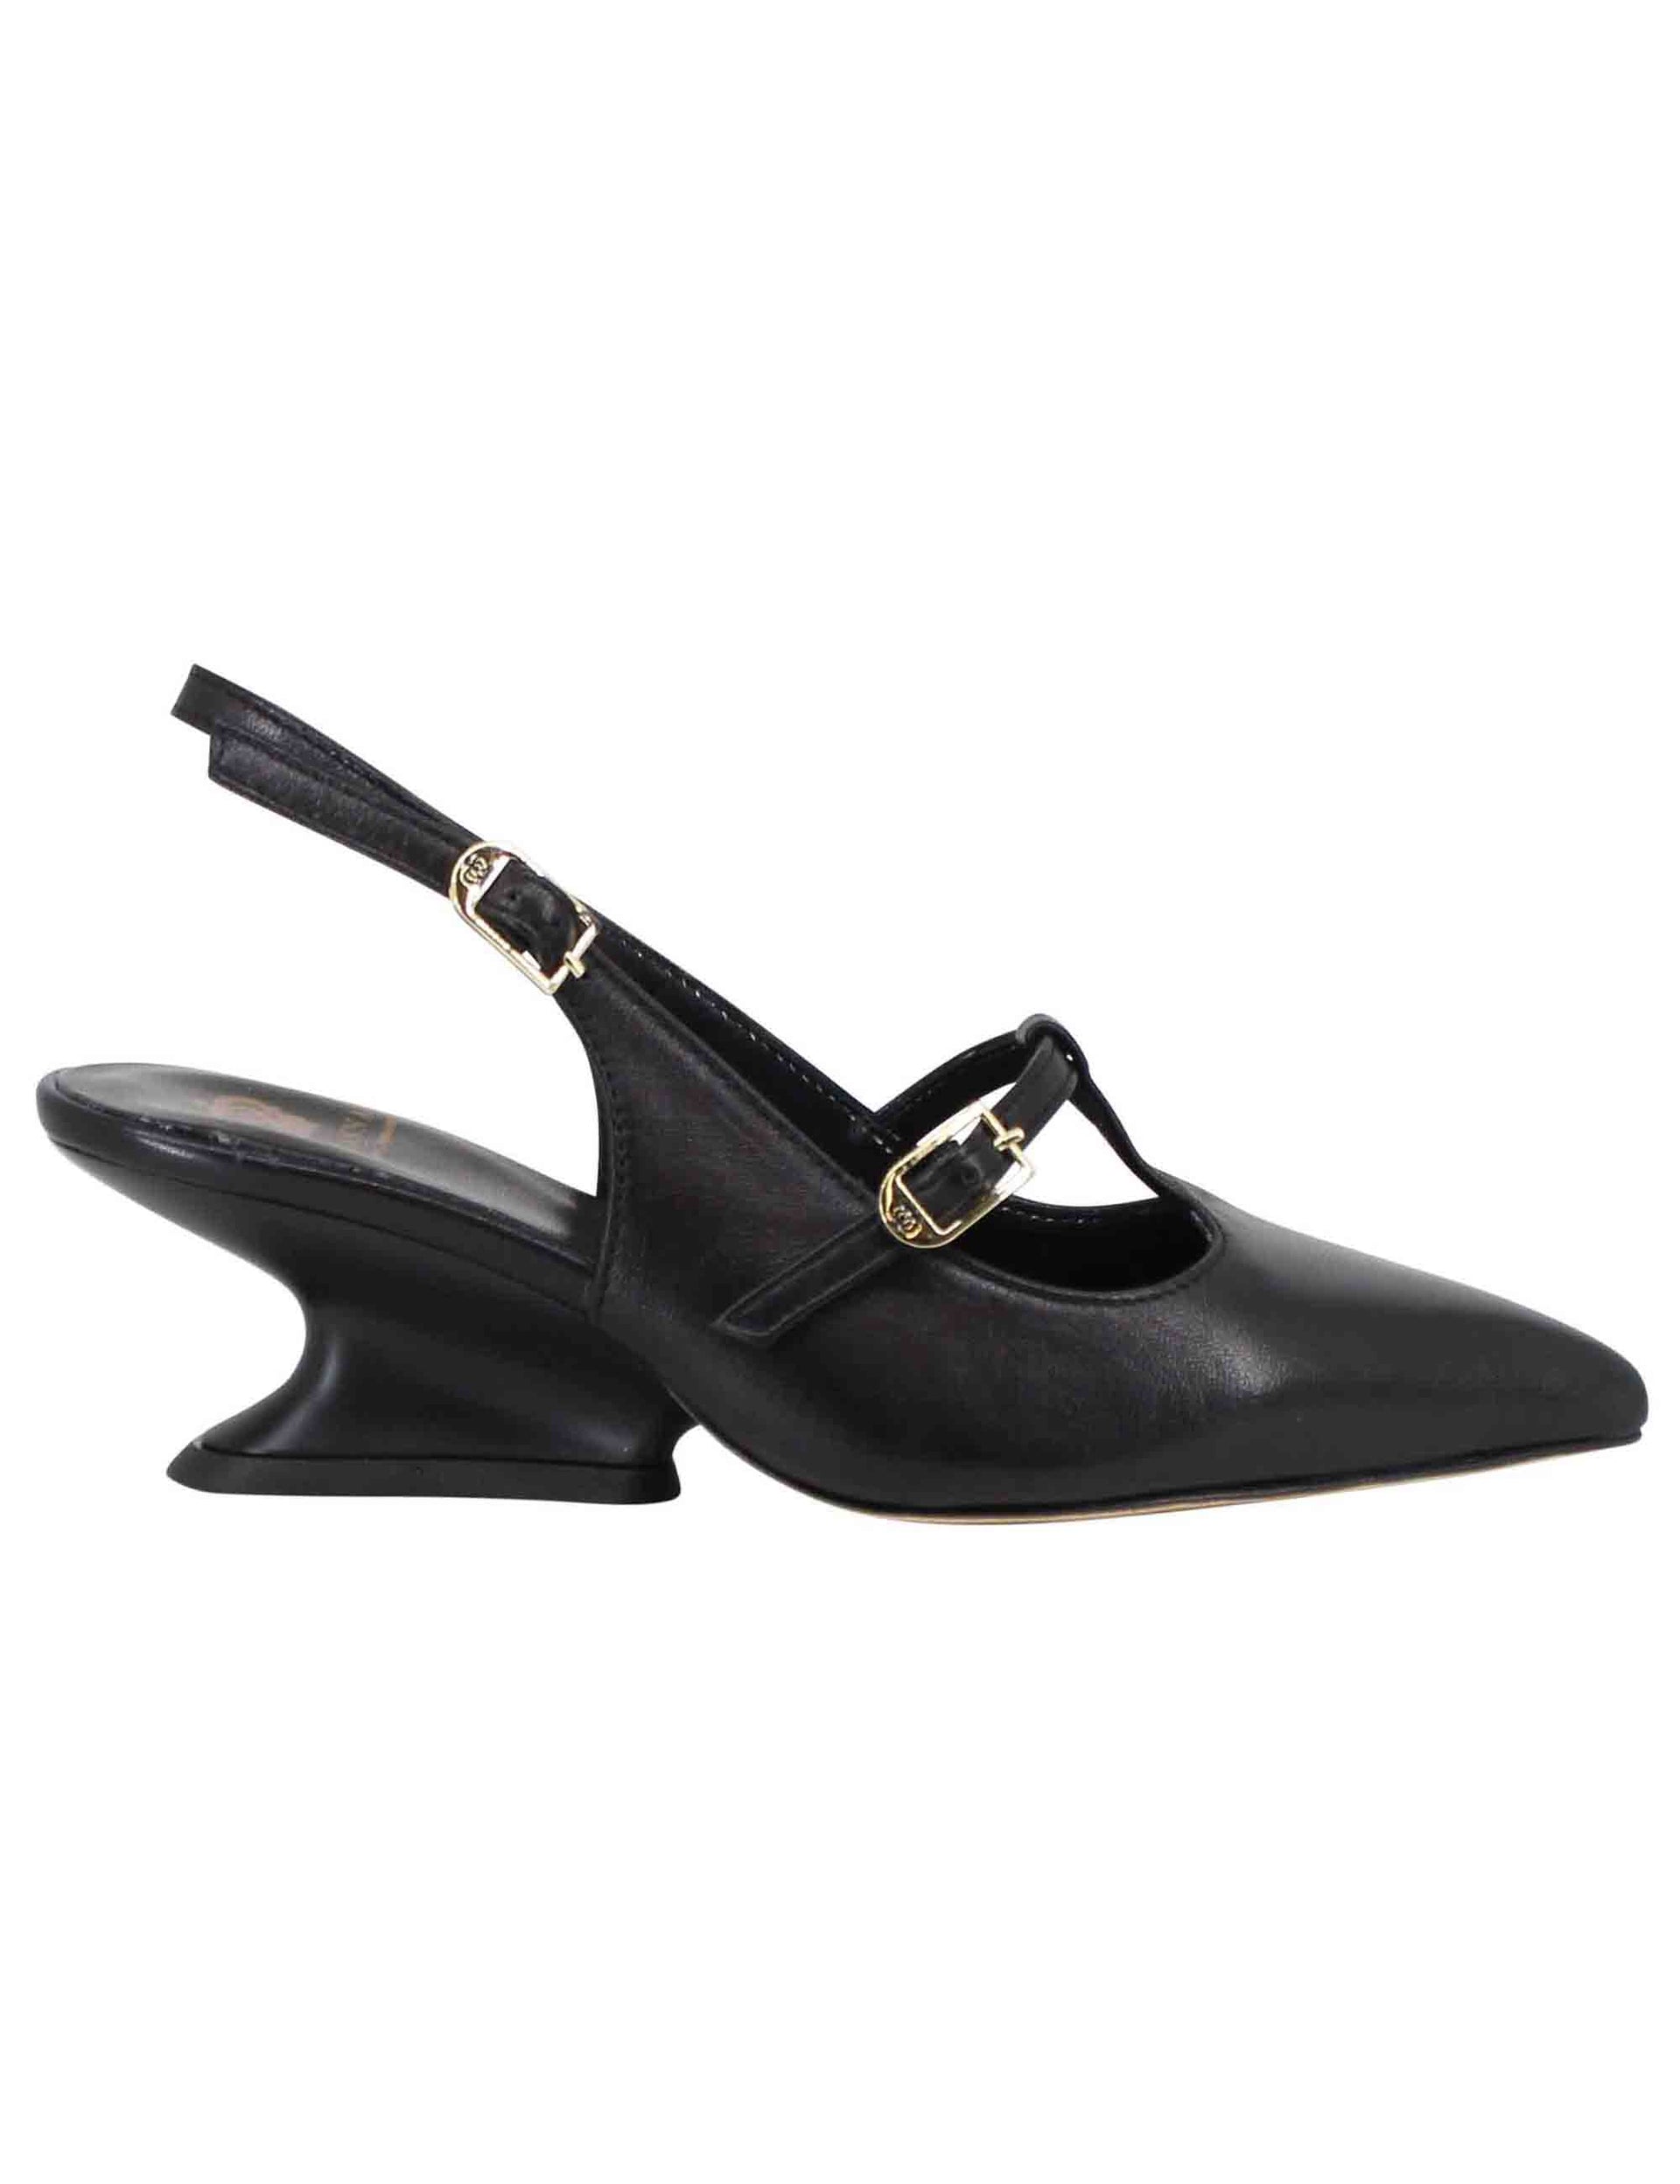 Women's slingback pumps in black leather with wedge heel